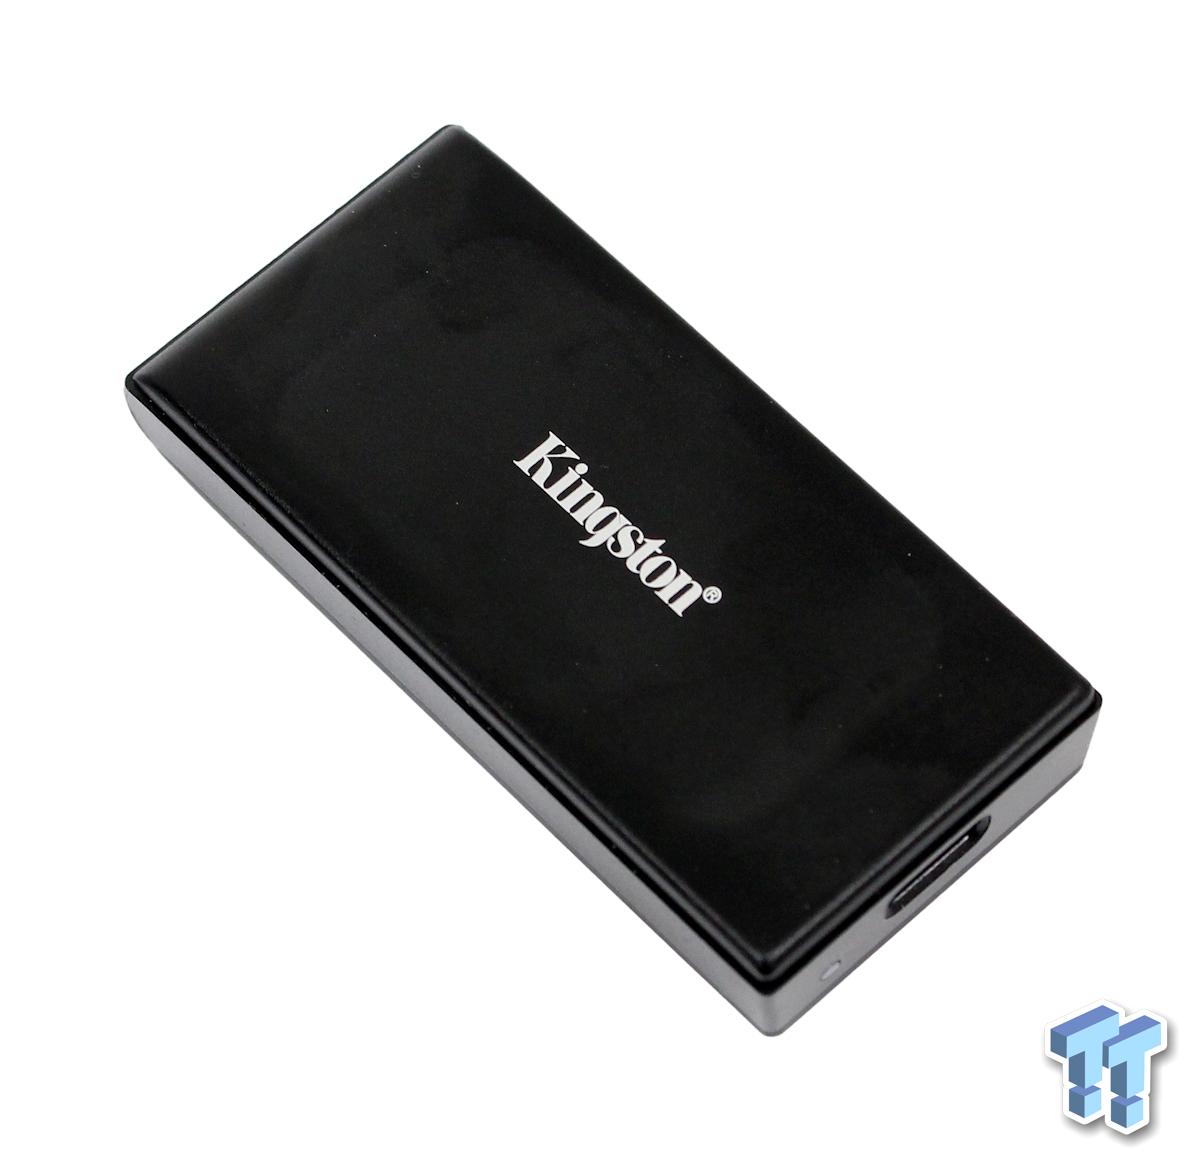 Kingston XS2000 review: Ultraportable SSD with blazing fast transfer speeds